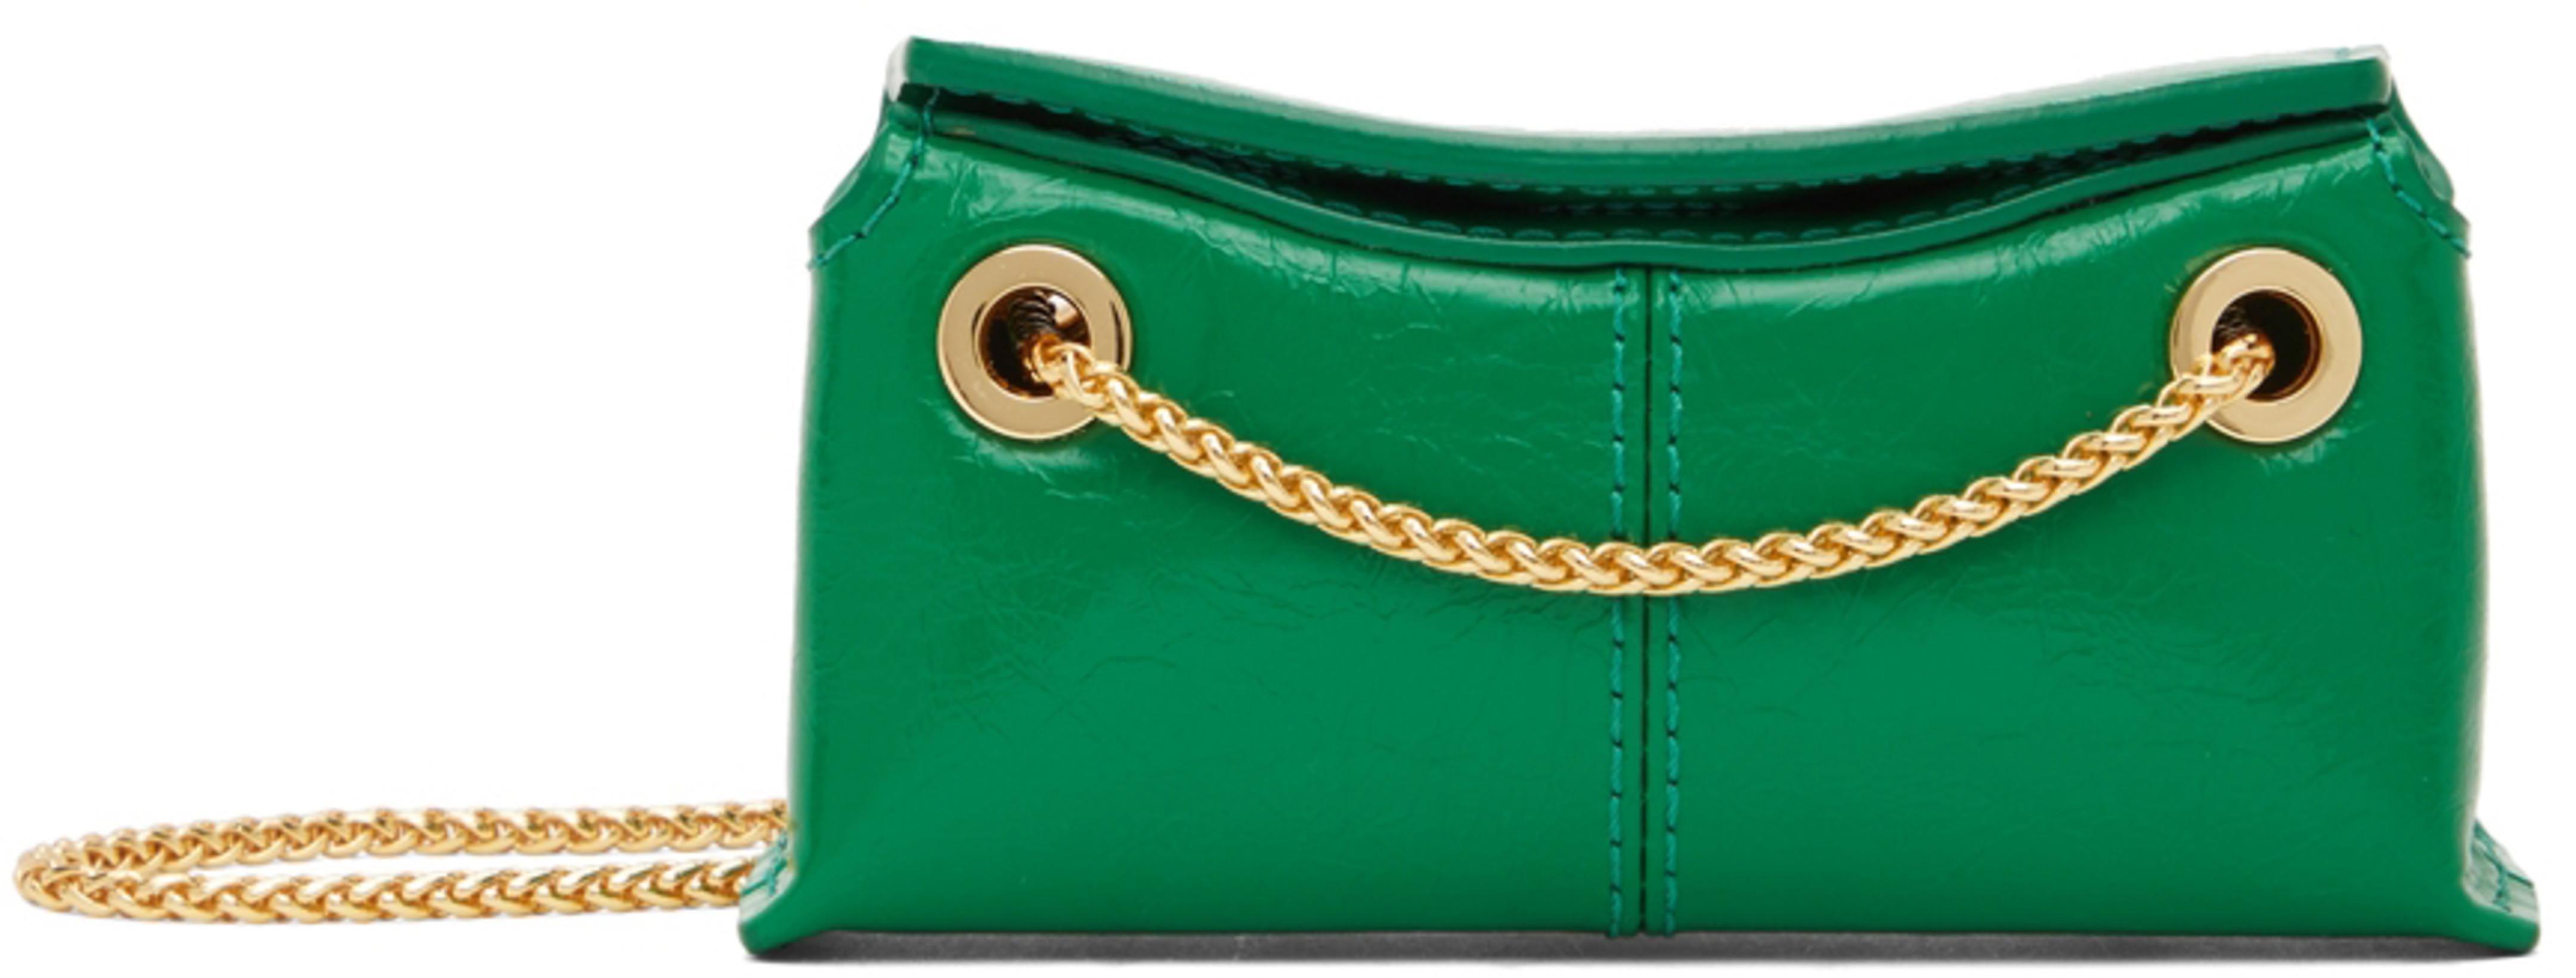 Green The Volon Edition Leather Mini Shoulder Bag by BONBOM